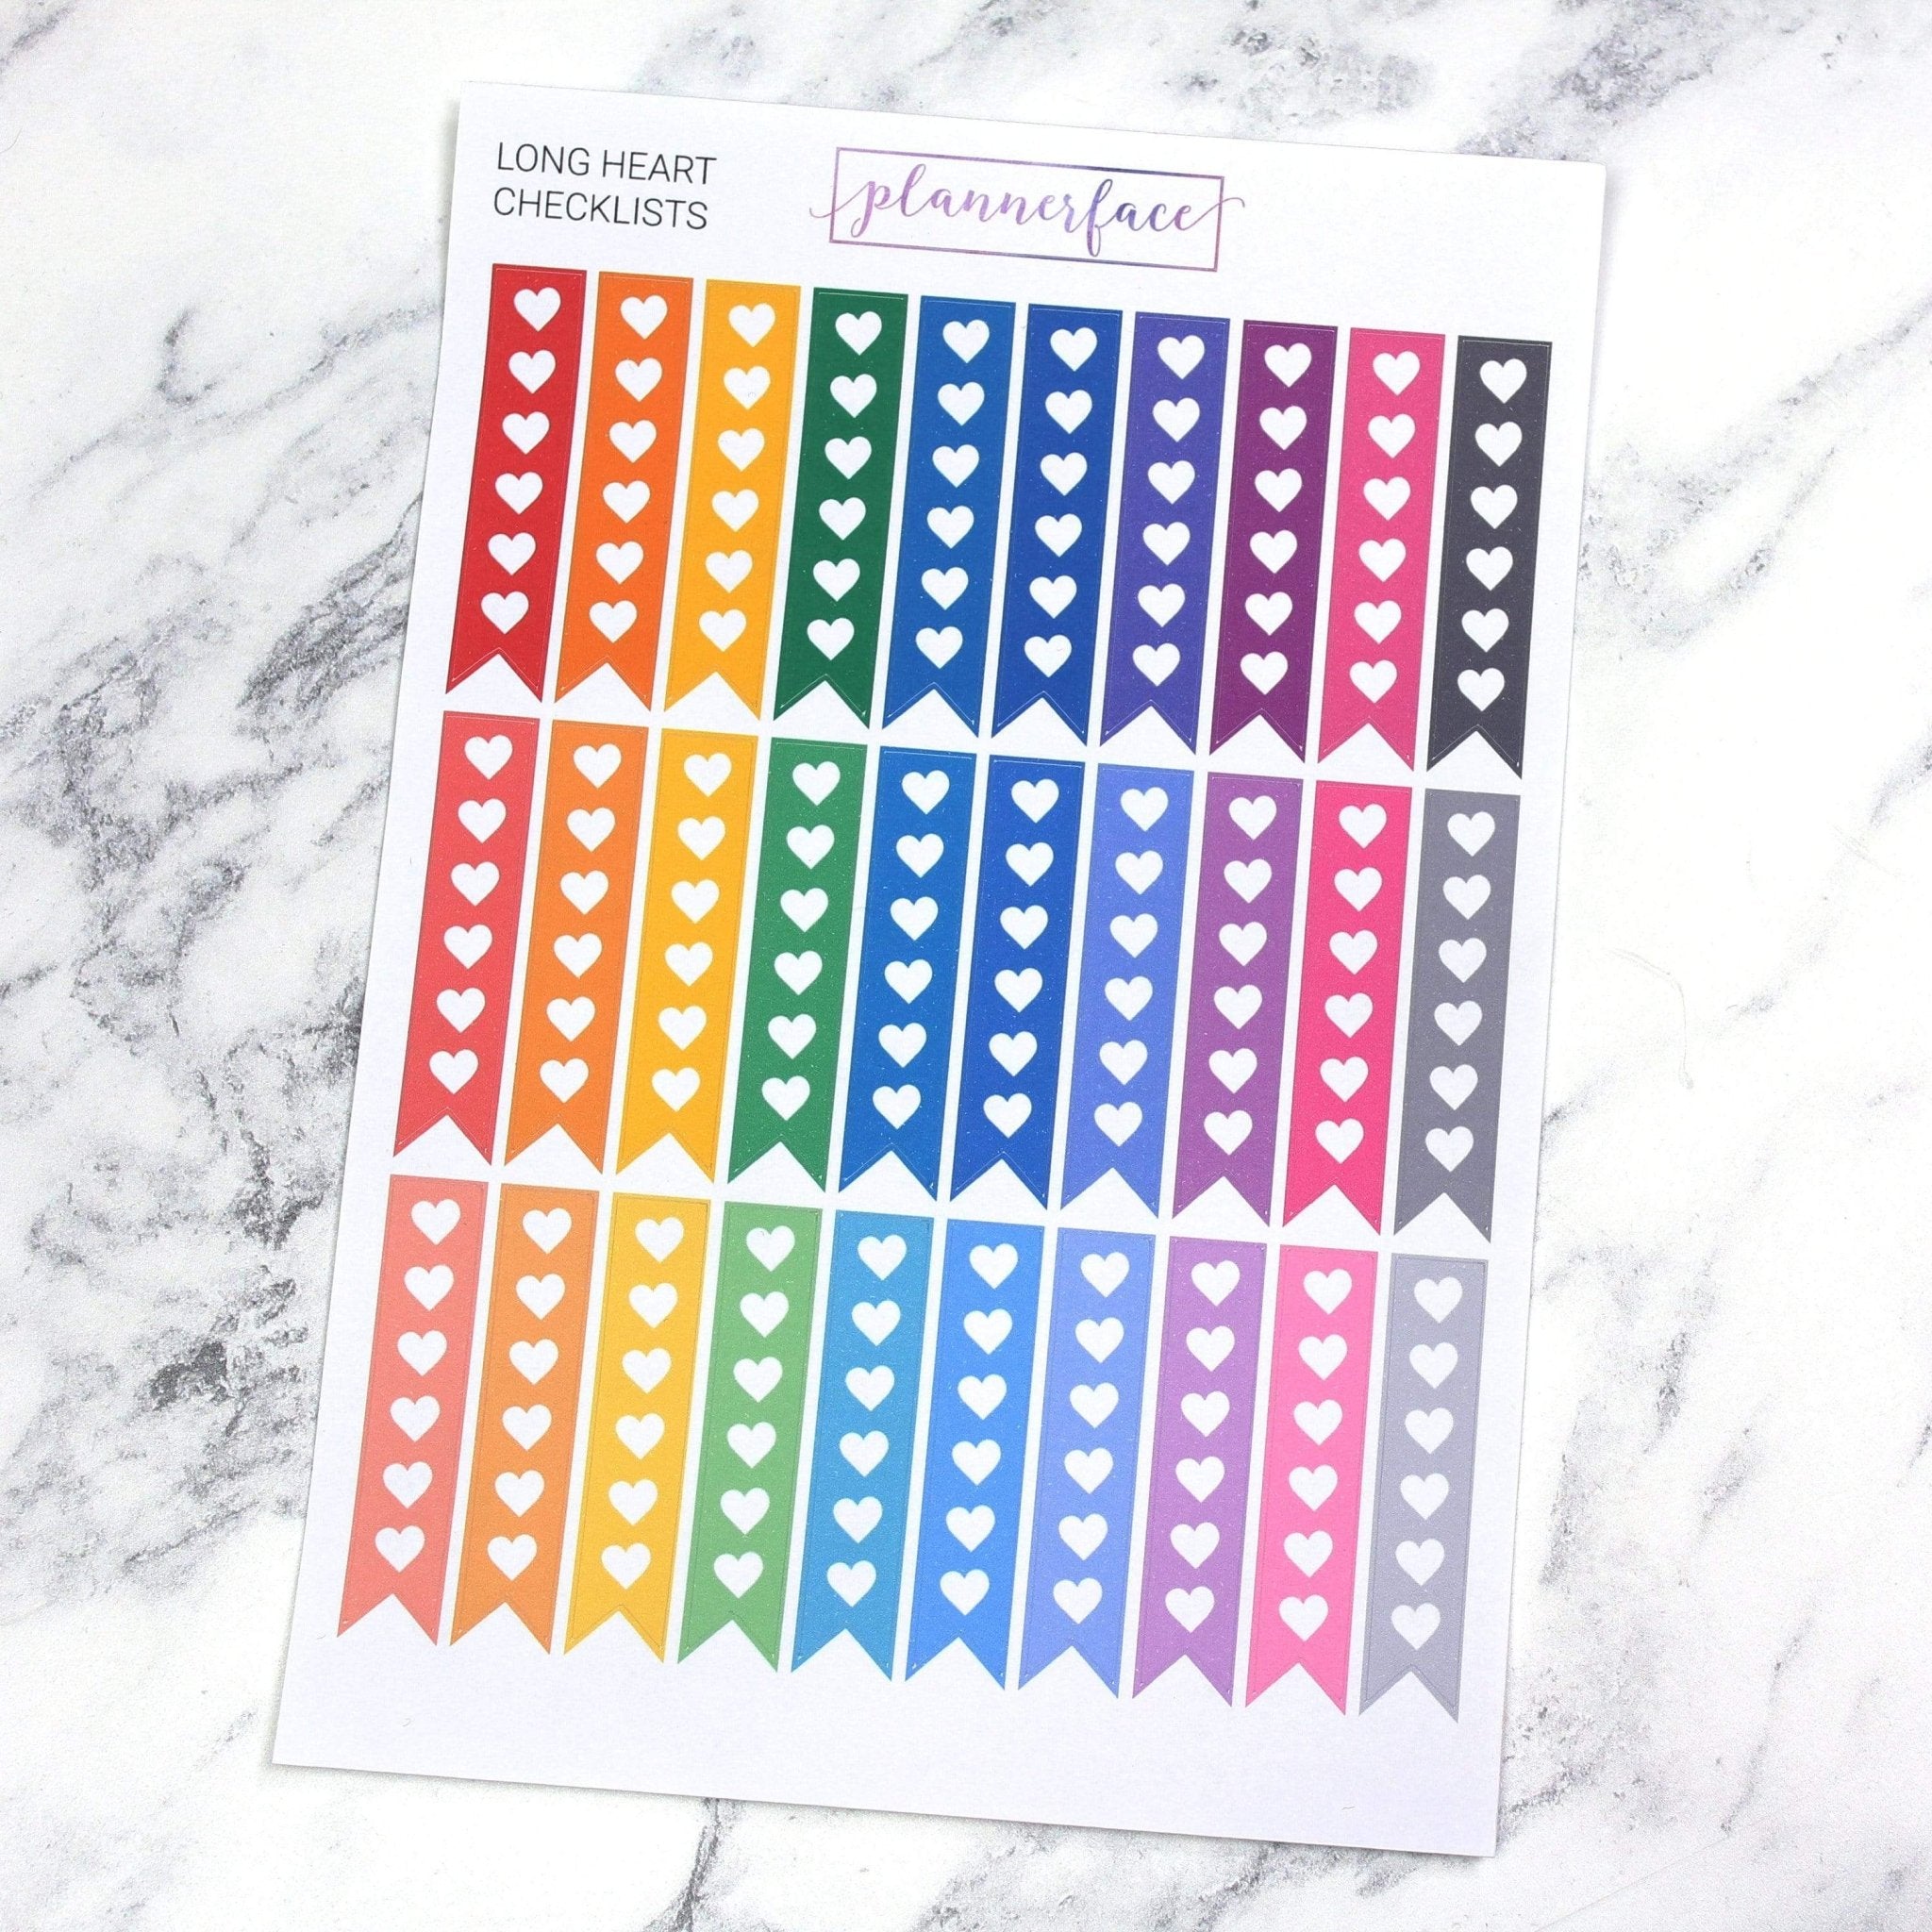 Heart Checklists - LONG | Multicolour by Plannerface